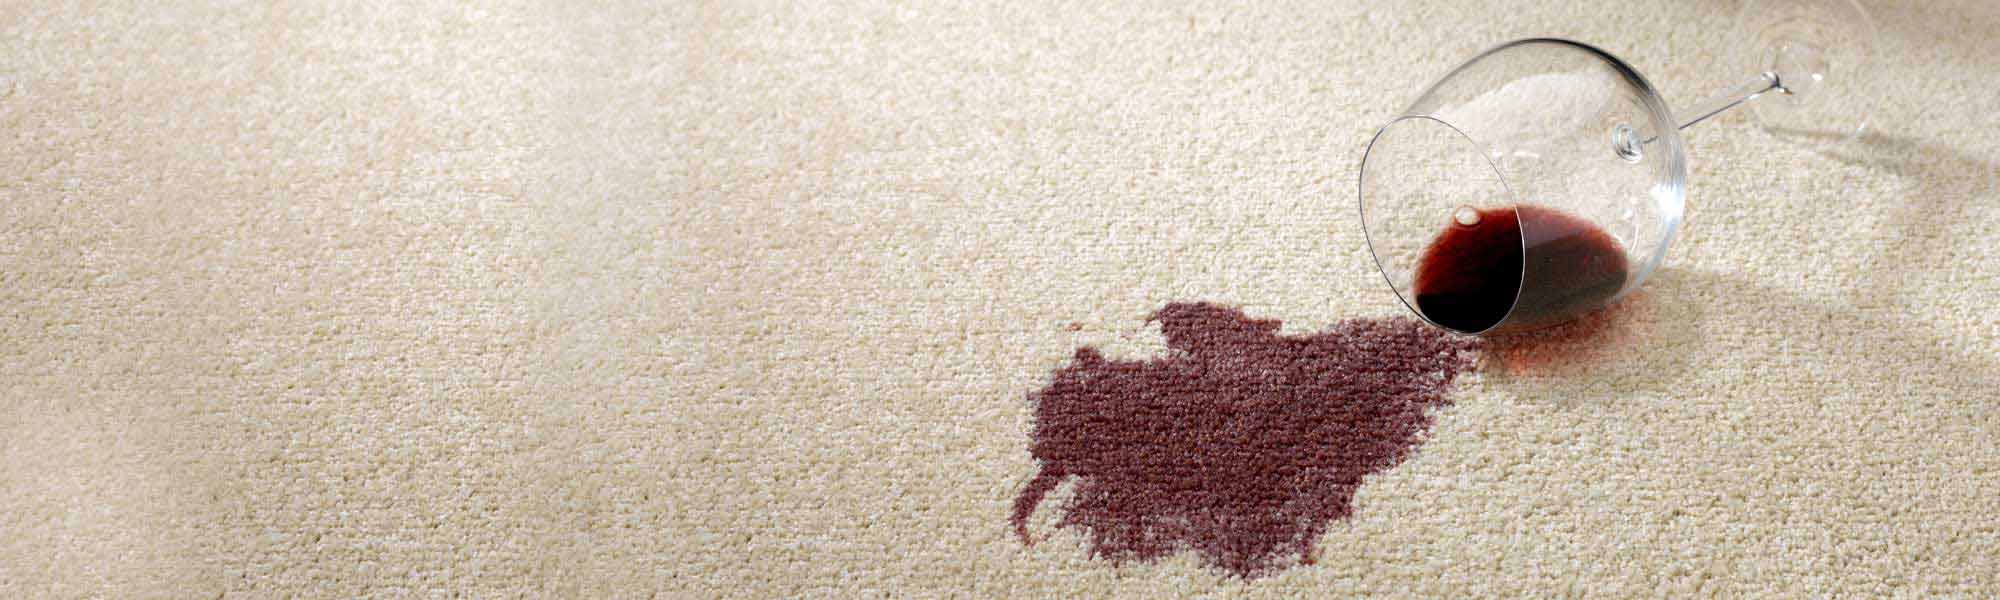 Professional Stain Removal Service by Community Chem-Dry in Sarasota and Venice FL